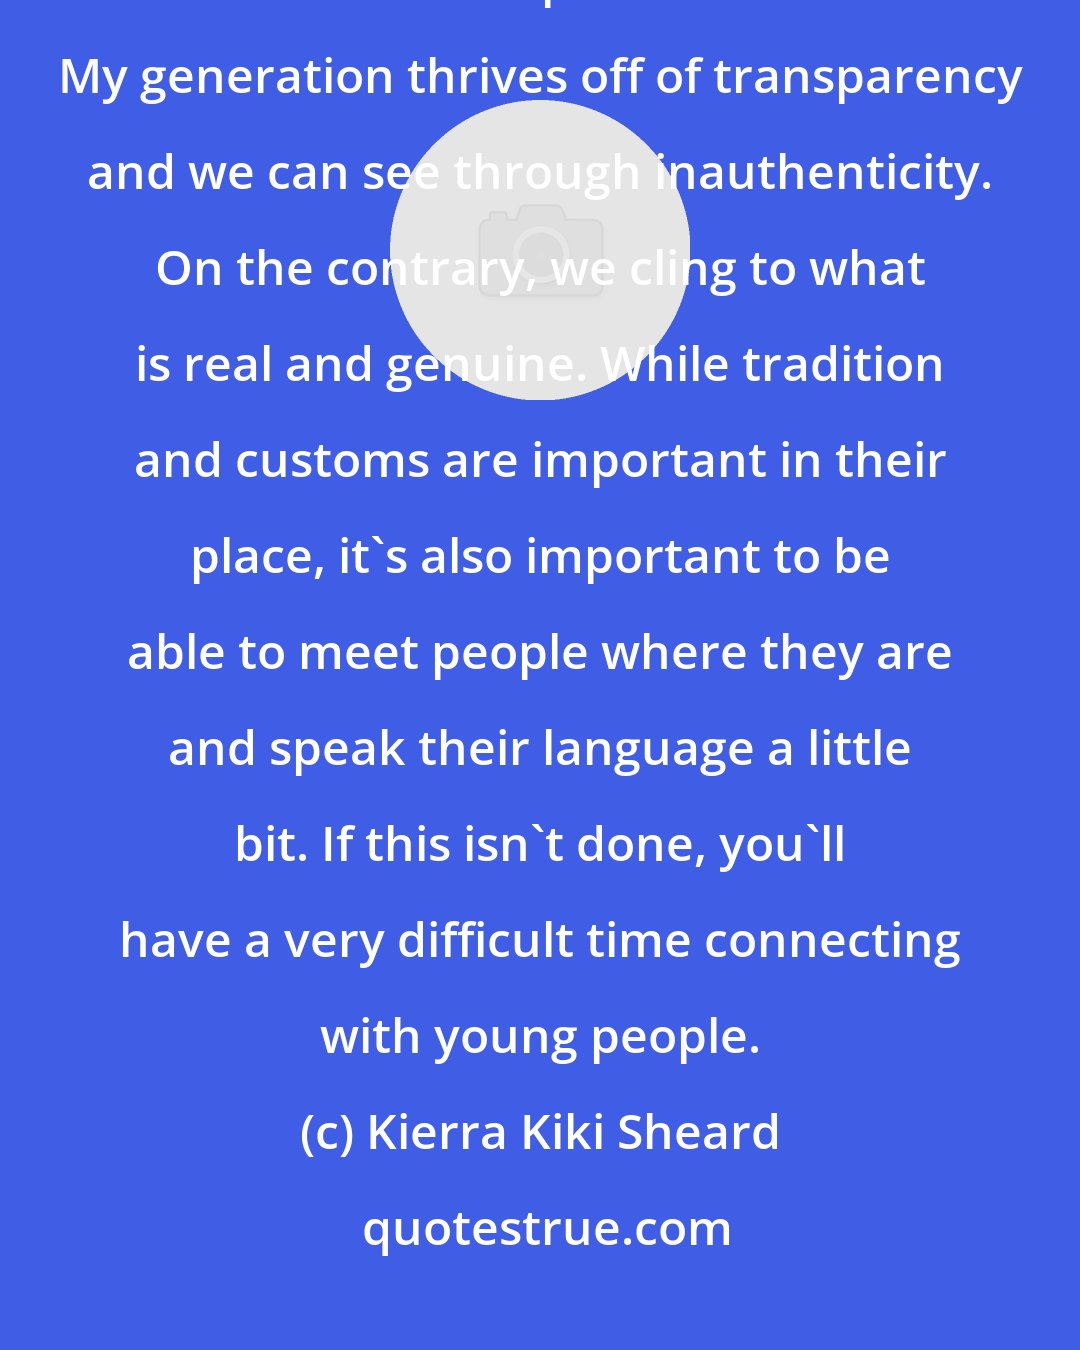 Kierra Kiki Sheard: Each generation is tough! I'm still learning my generation. The desire to connect has to be present and evident. My generation thrives off of transparency and we can see through inauthenticity. On the contrary, we cling to what is real and genuine. While tradition and customs are important in their place, it's also important to be able to meet people where they are and speak their language a little bit. If this isn't done, you'll have a very difficult time connecting with young people.